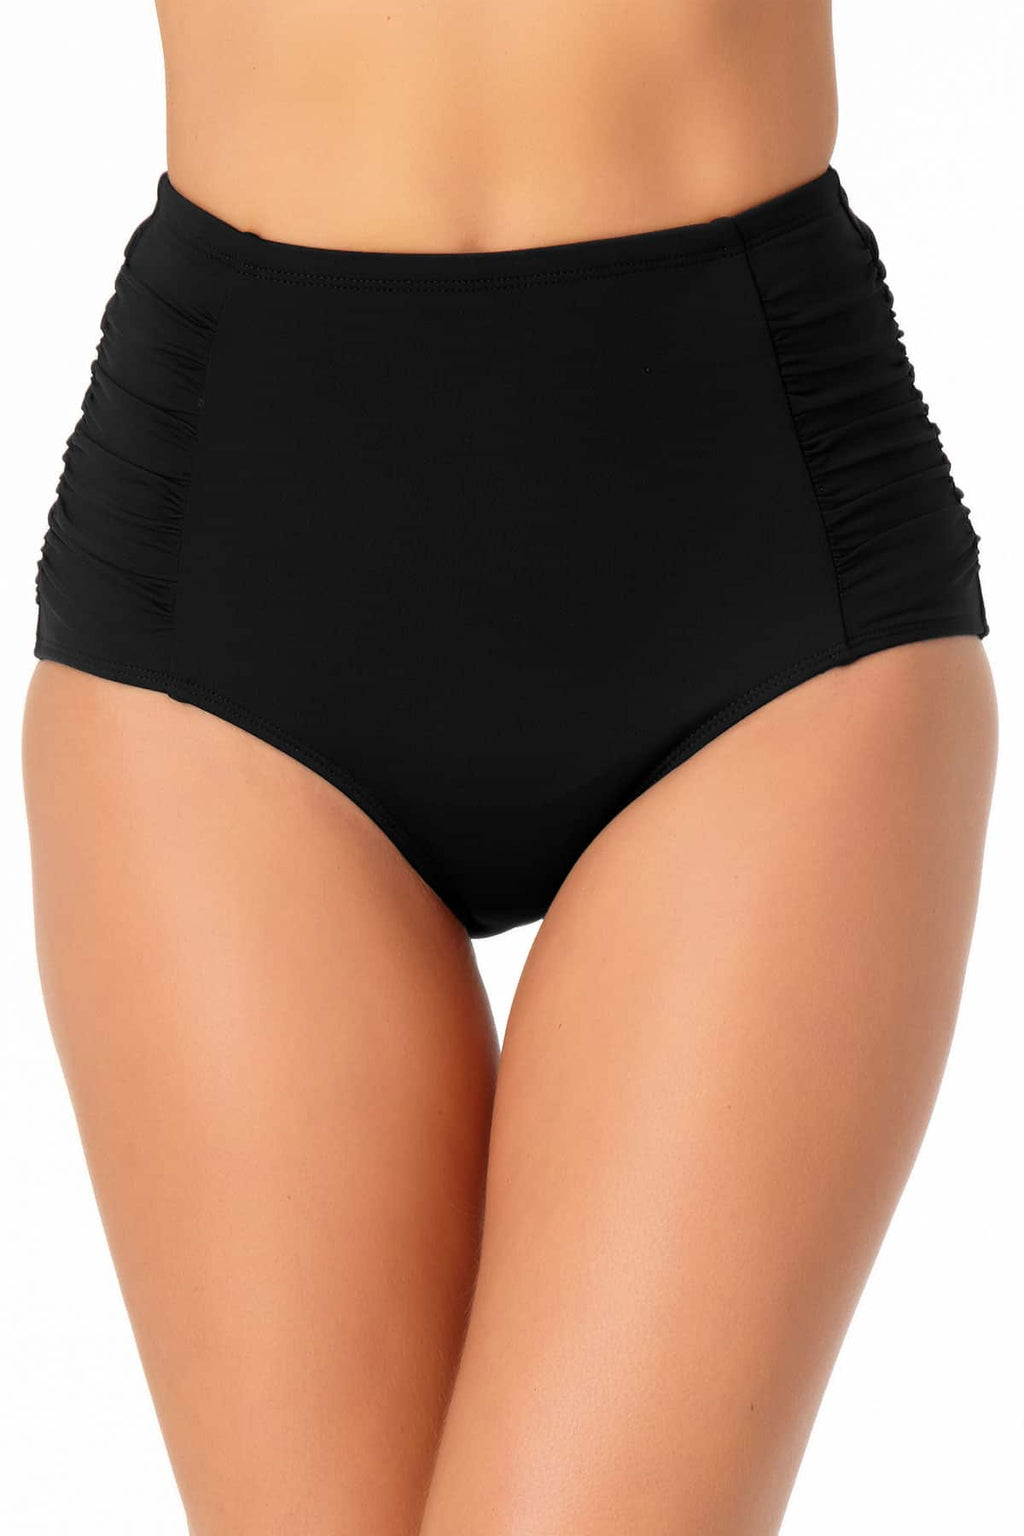 High Waisted Swimsuits: Bottoms, Bikinis, Tummy Control Bottoms – Anne Cole